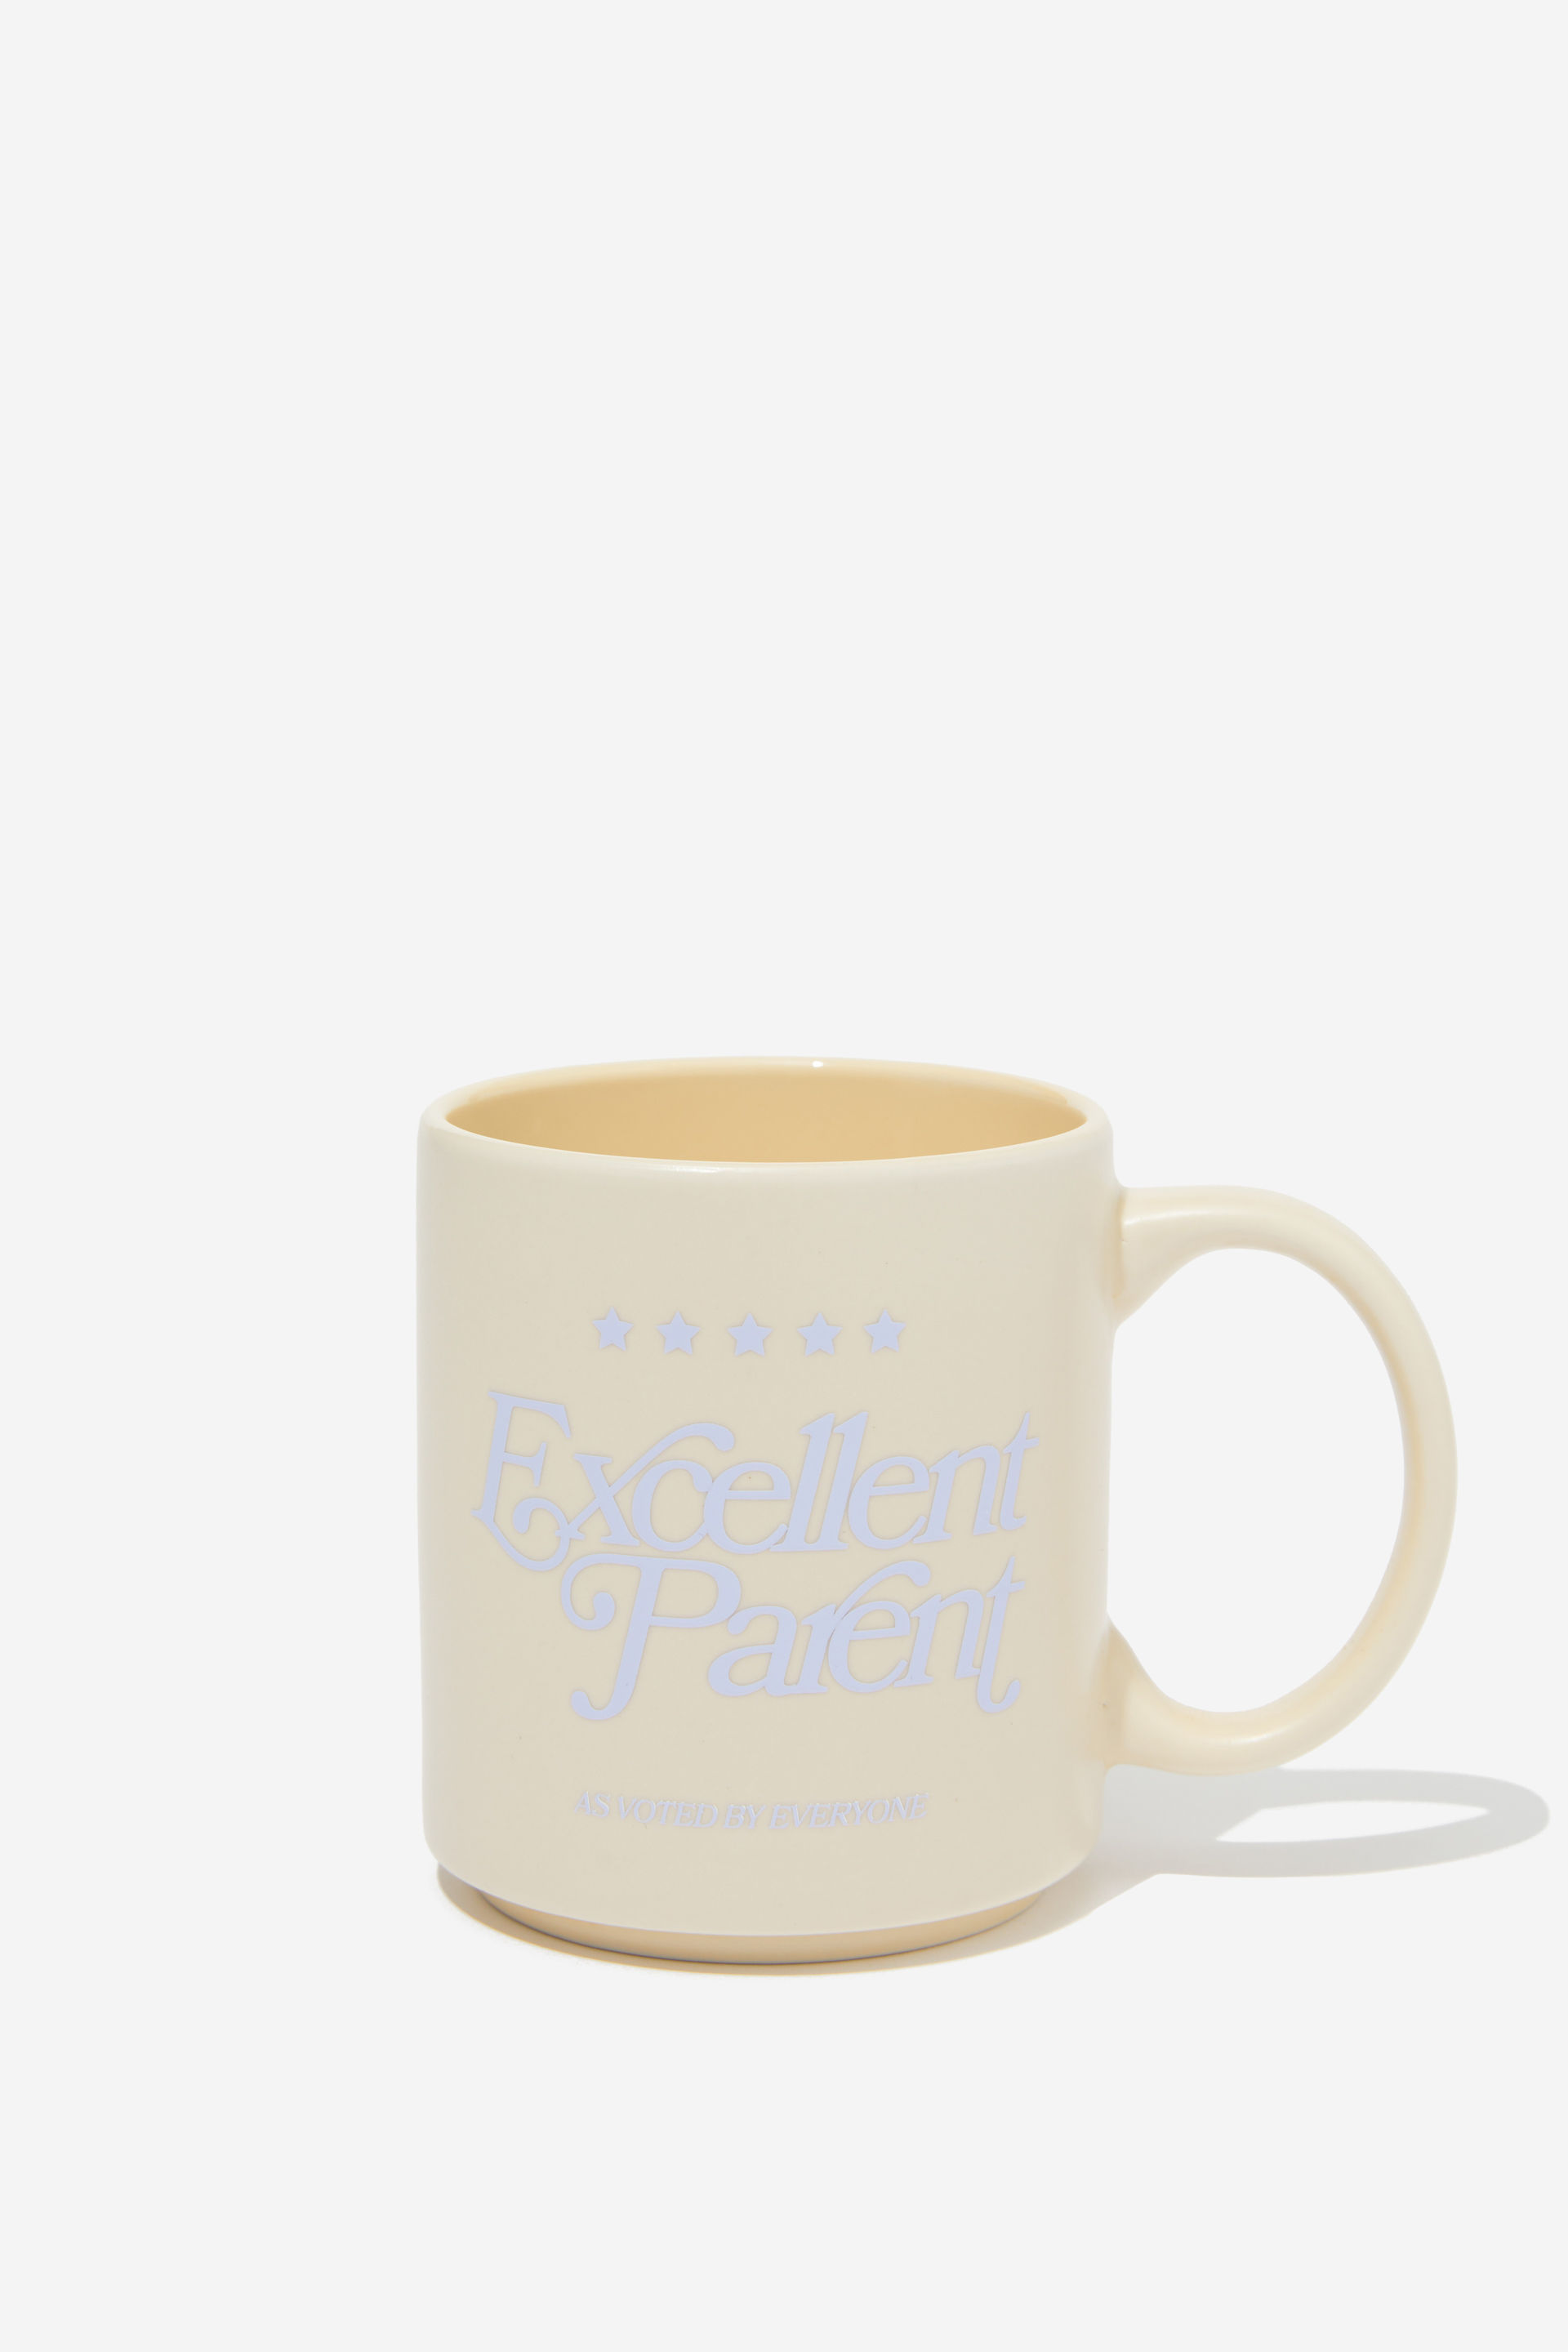 Typo - Daily Mug - Excellent parent as voted